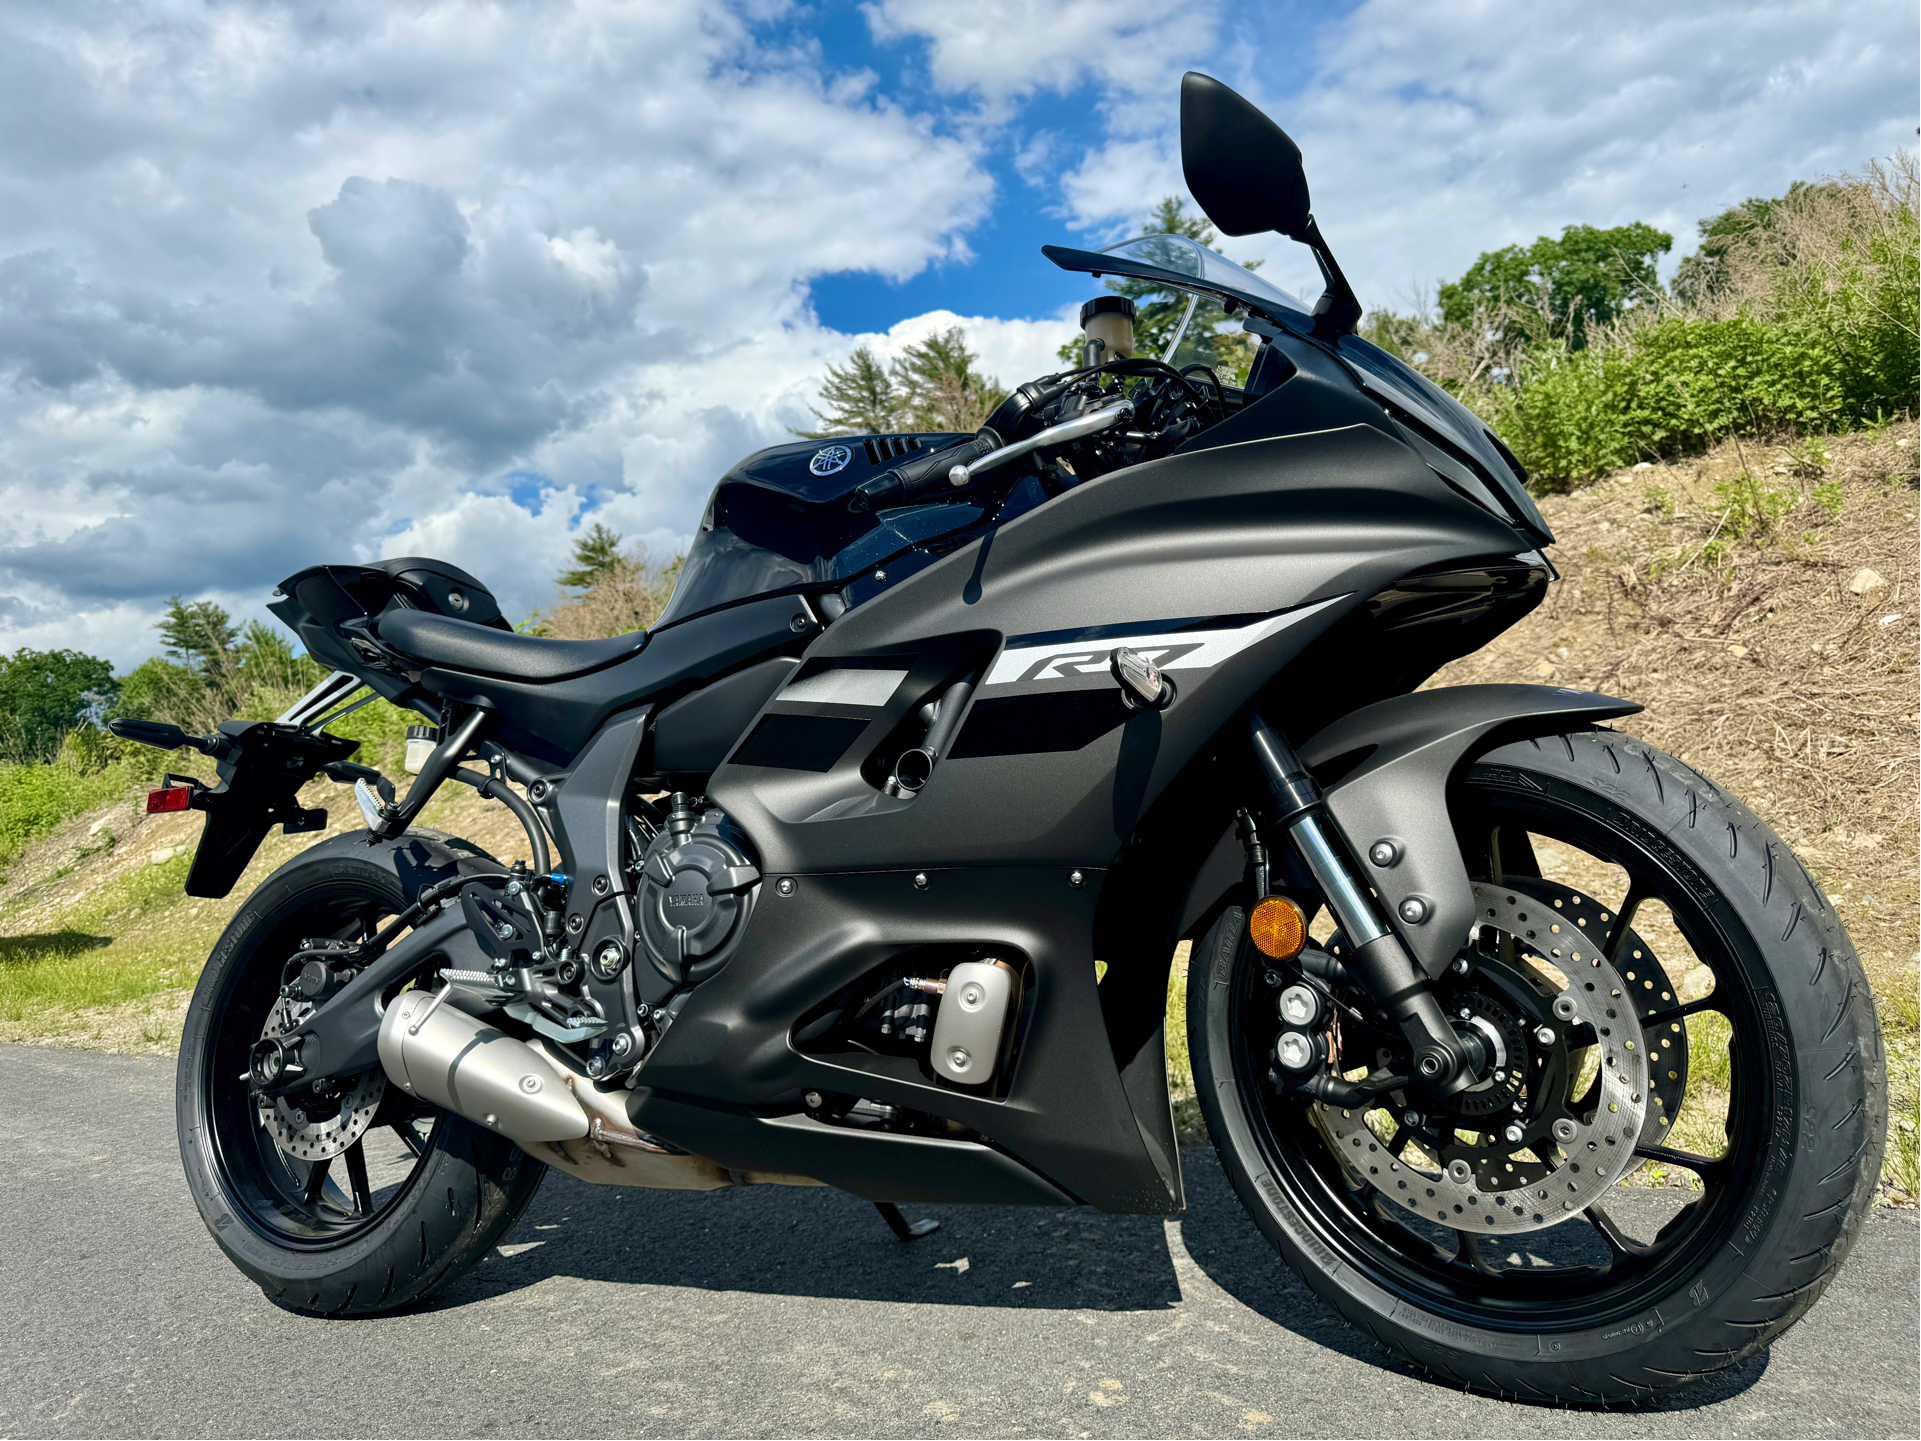 2024 Yamaha YZF-R7 in Manchester, New Hampshire - Photo 1